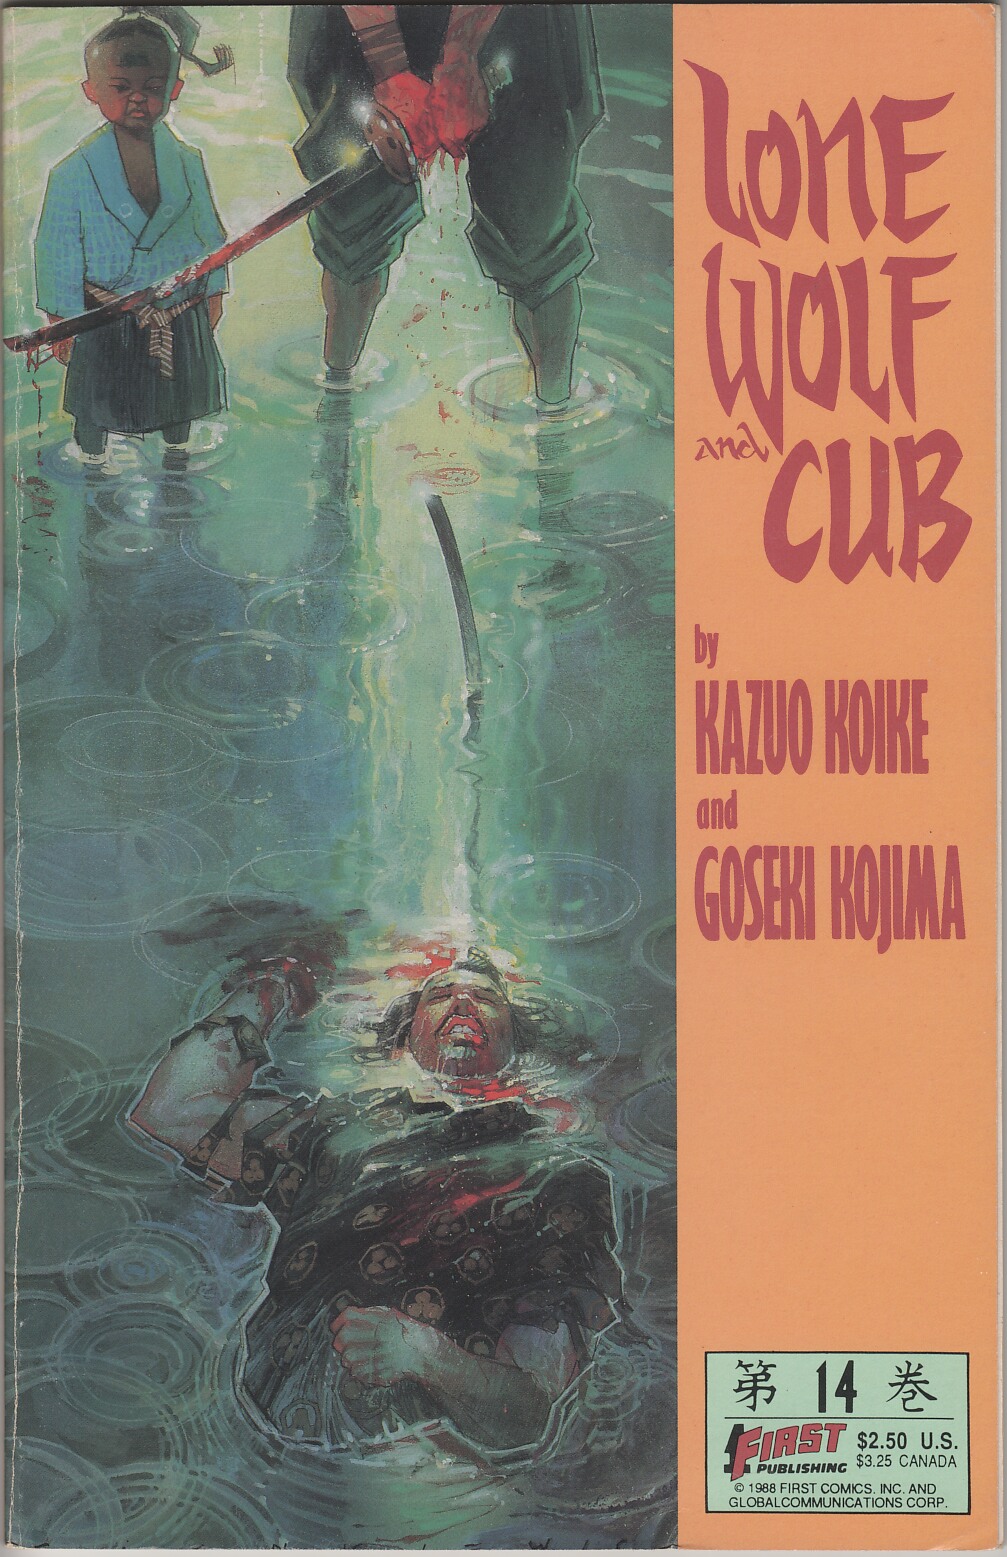 Read online Lone Wolf and Cub comic -  Issue #14 - 1